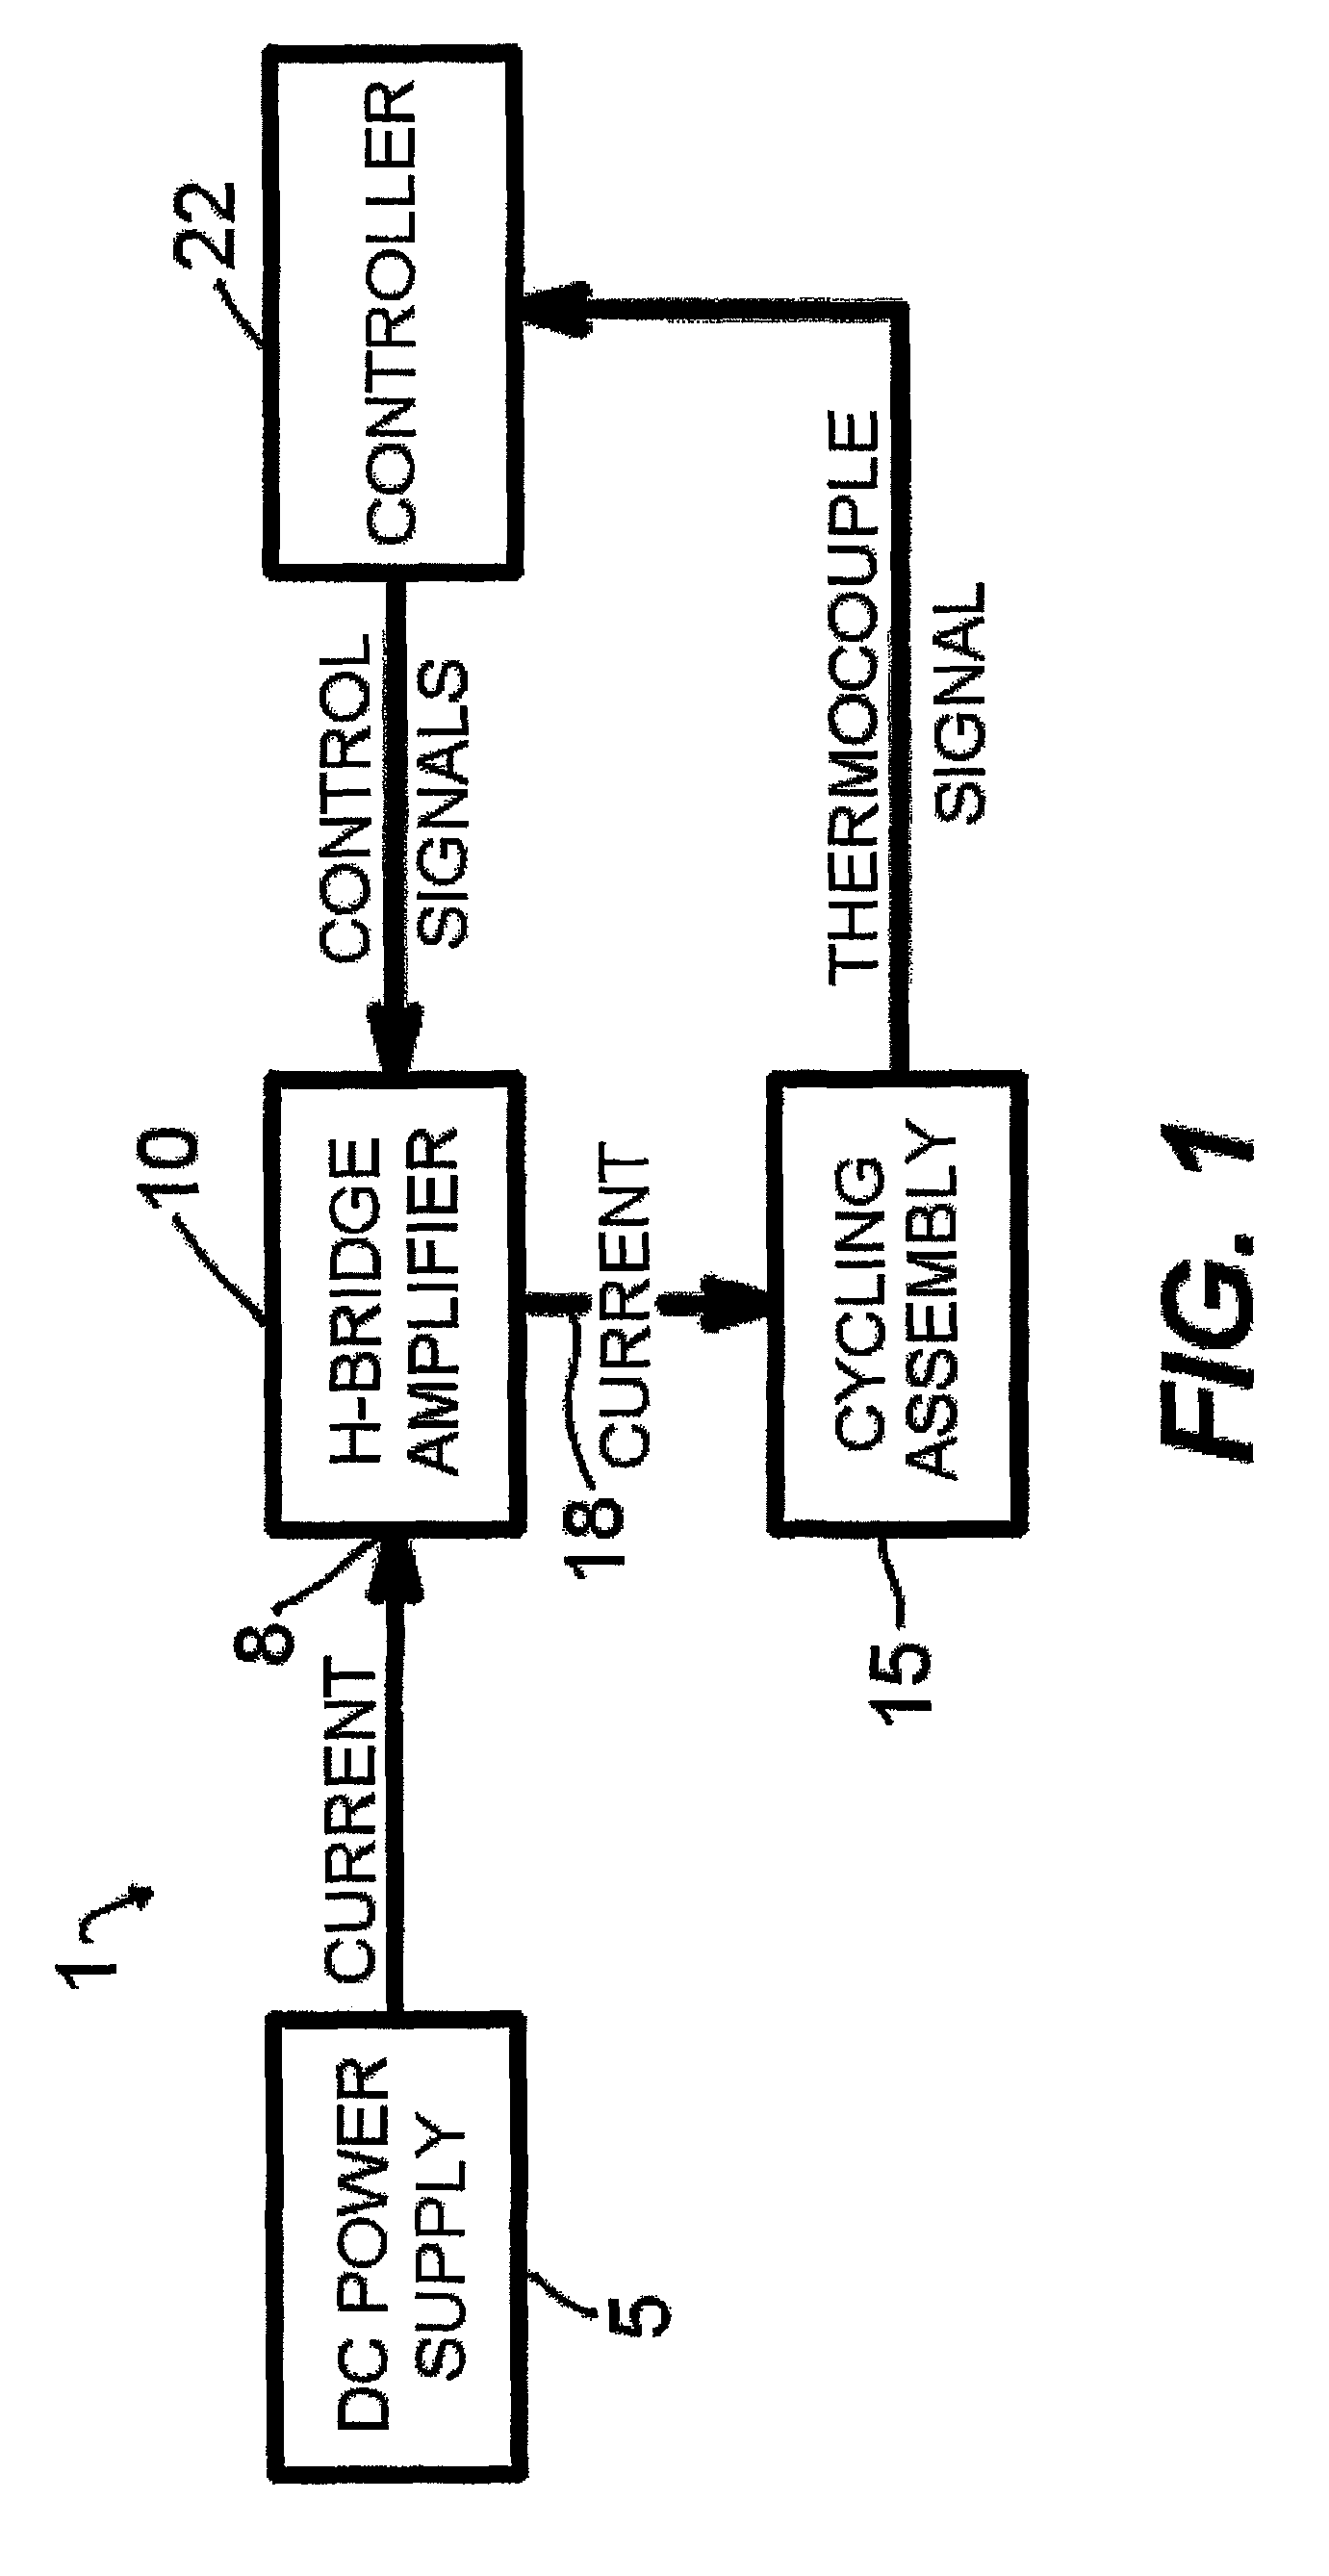 Thermocycler and sample vessel for rapid amplification of DNA